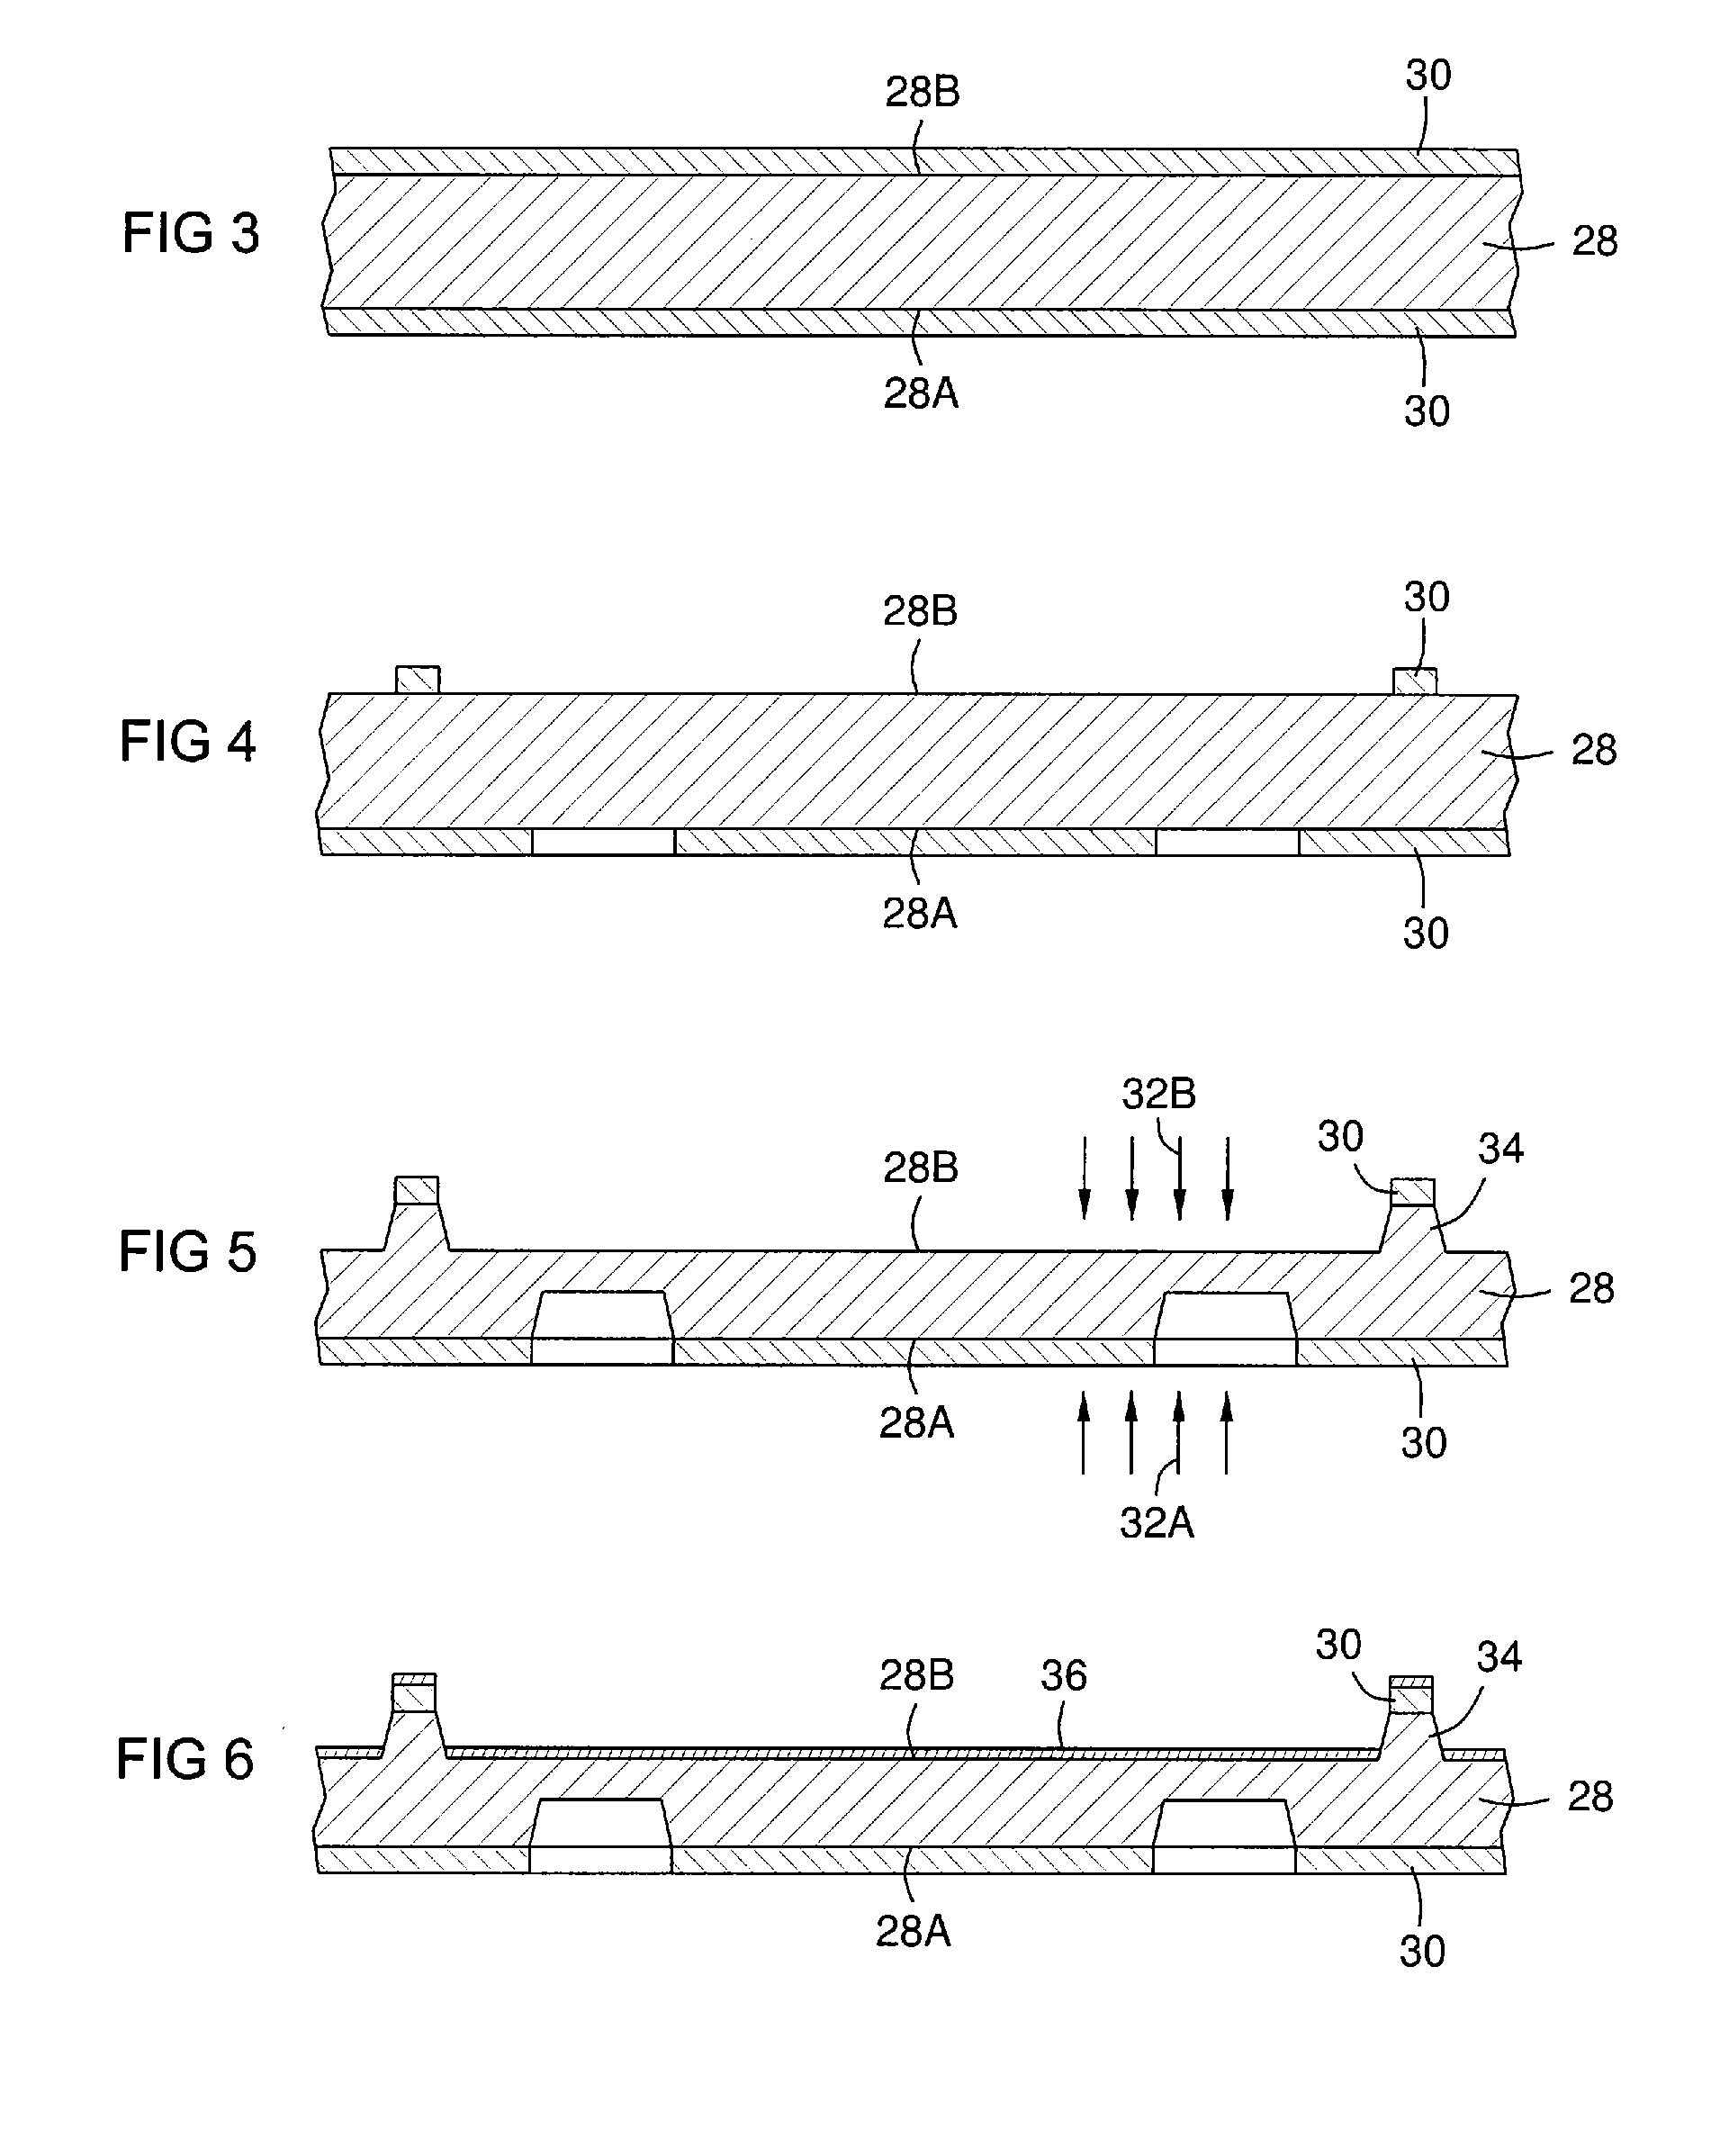 Sealed wafer packaging of microelectromechanical systems